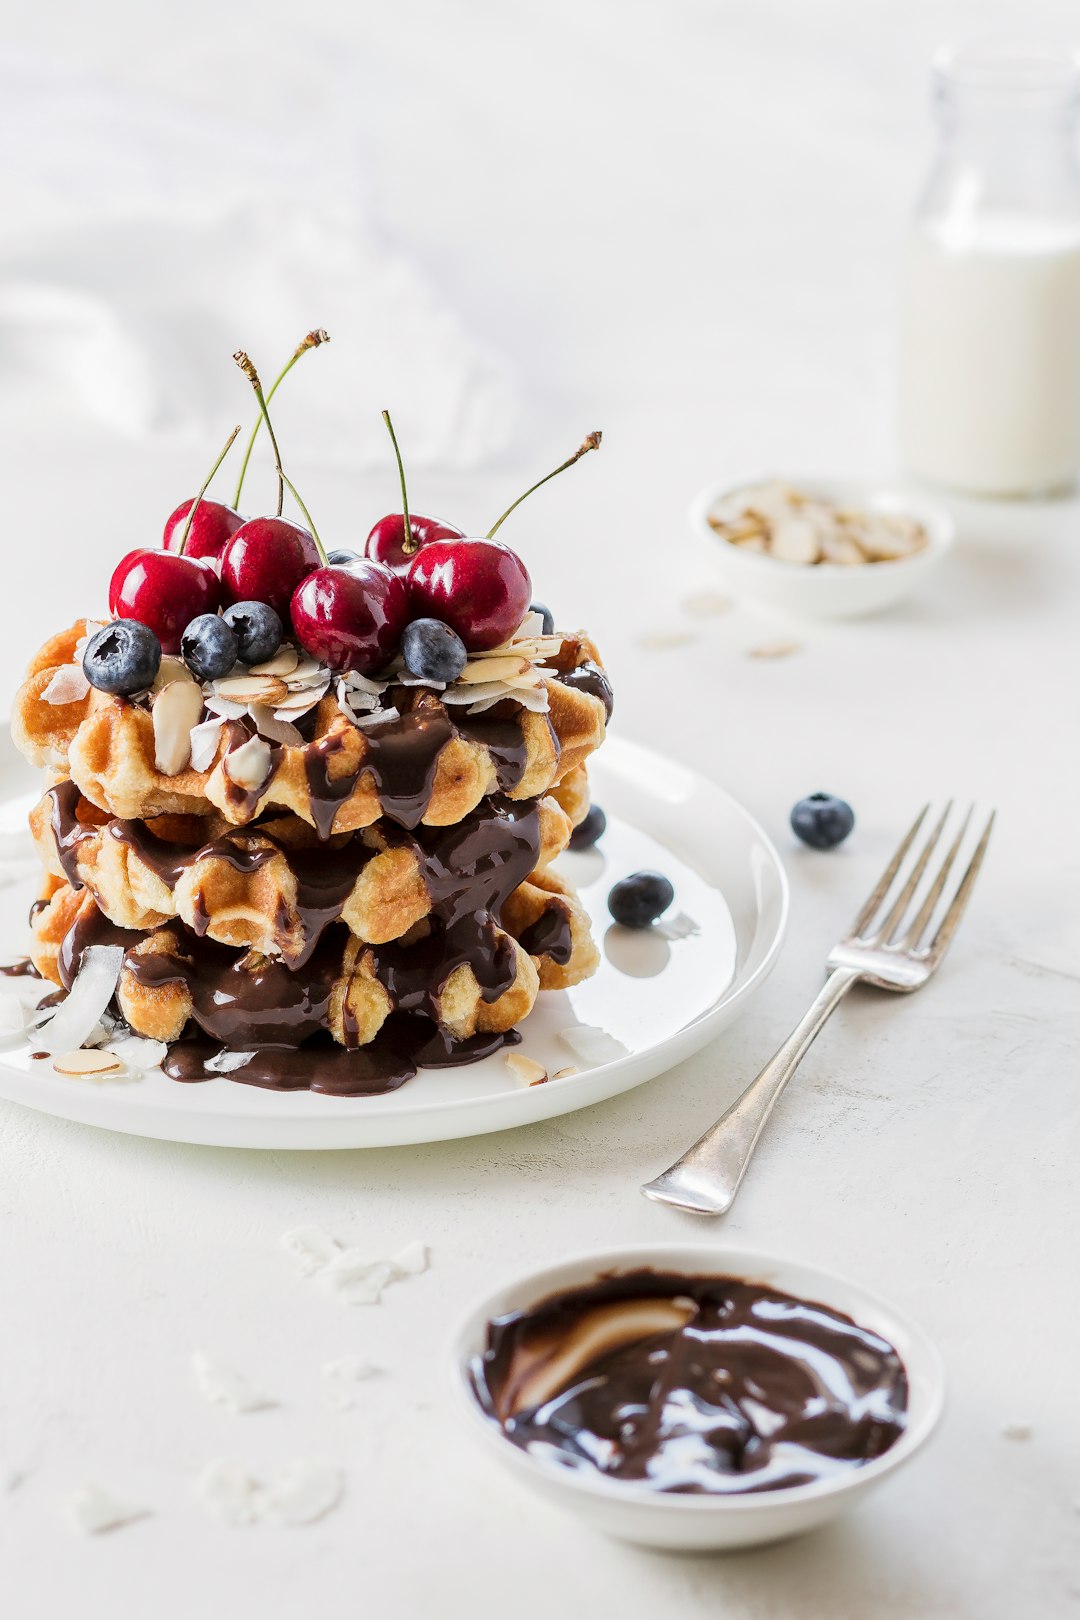 Waffles dripping in ooey gooey chocolate goodness.